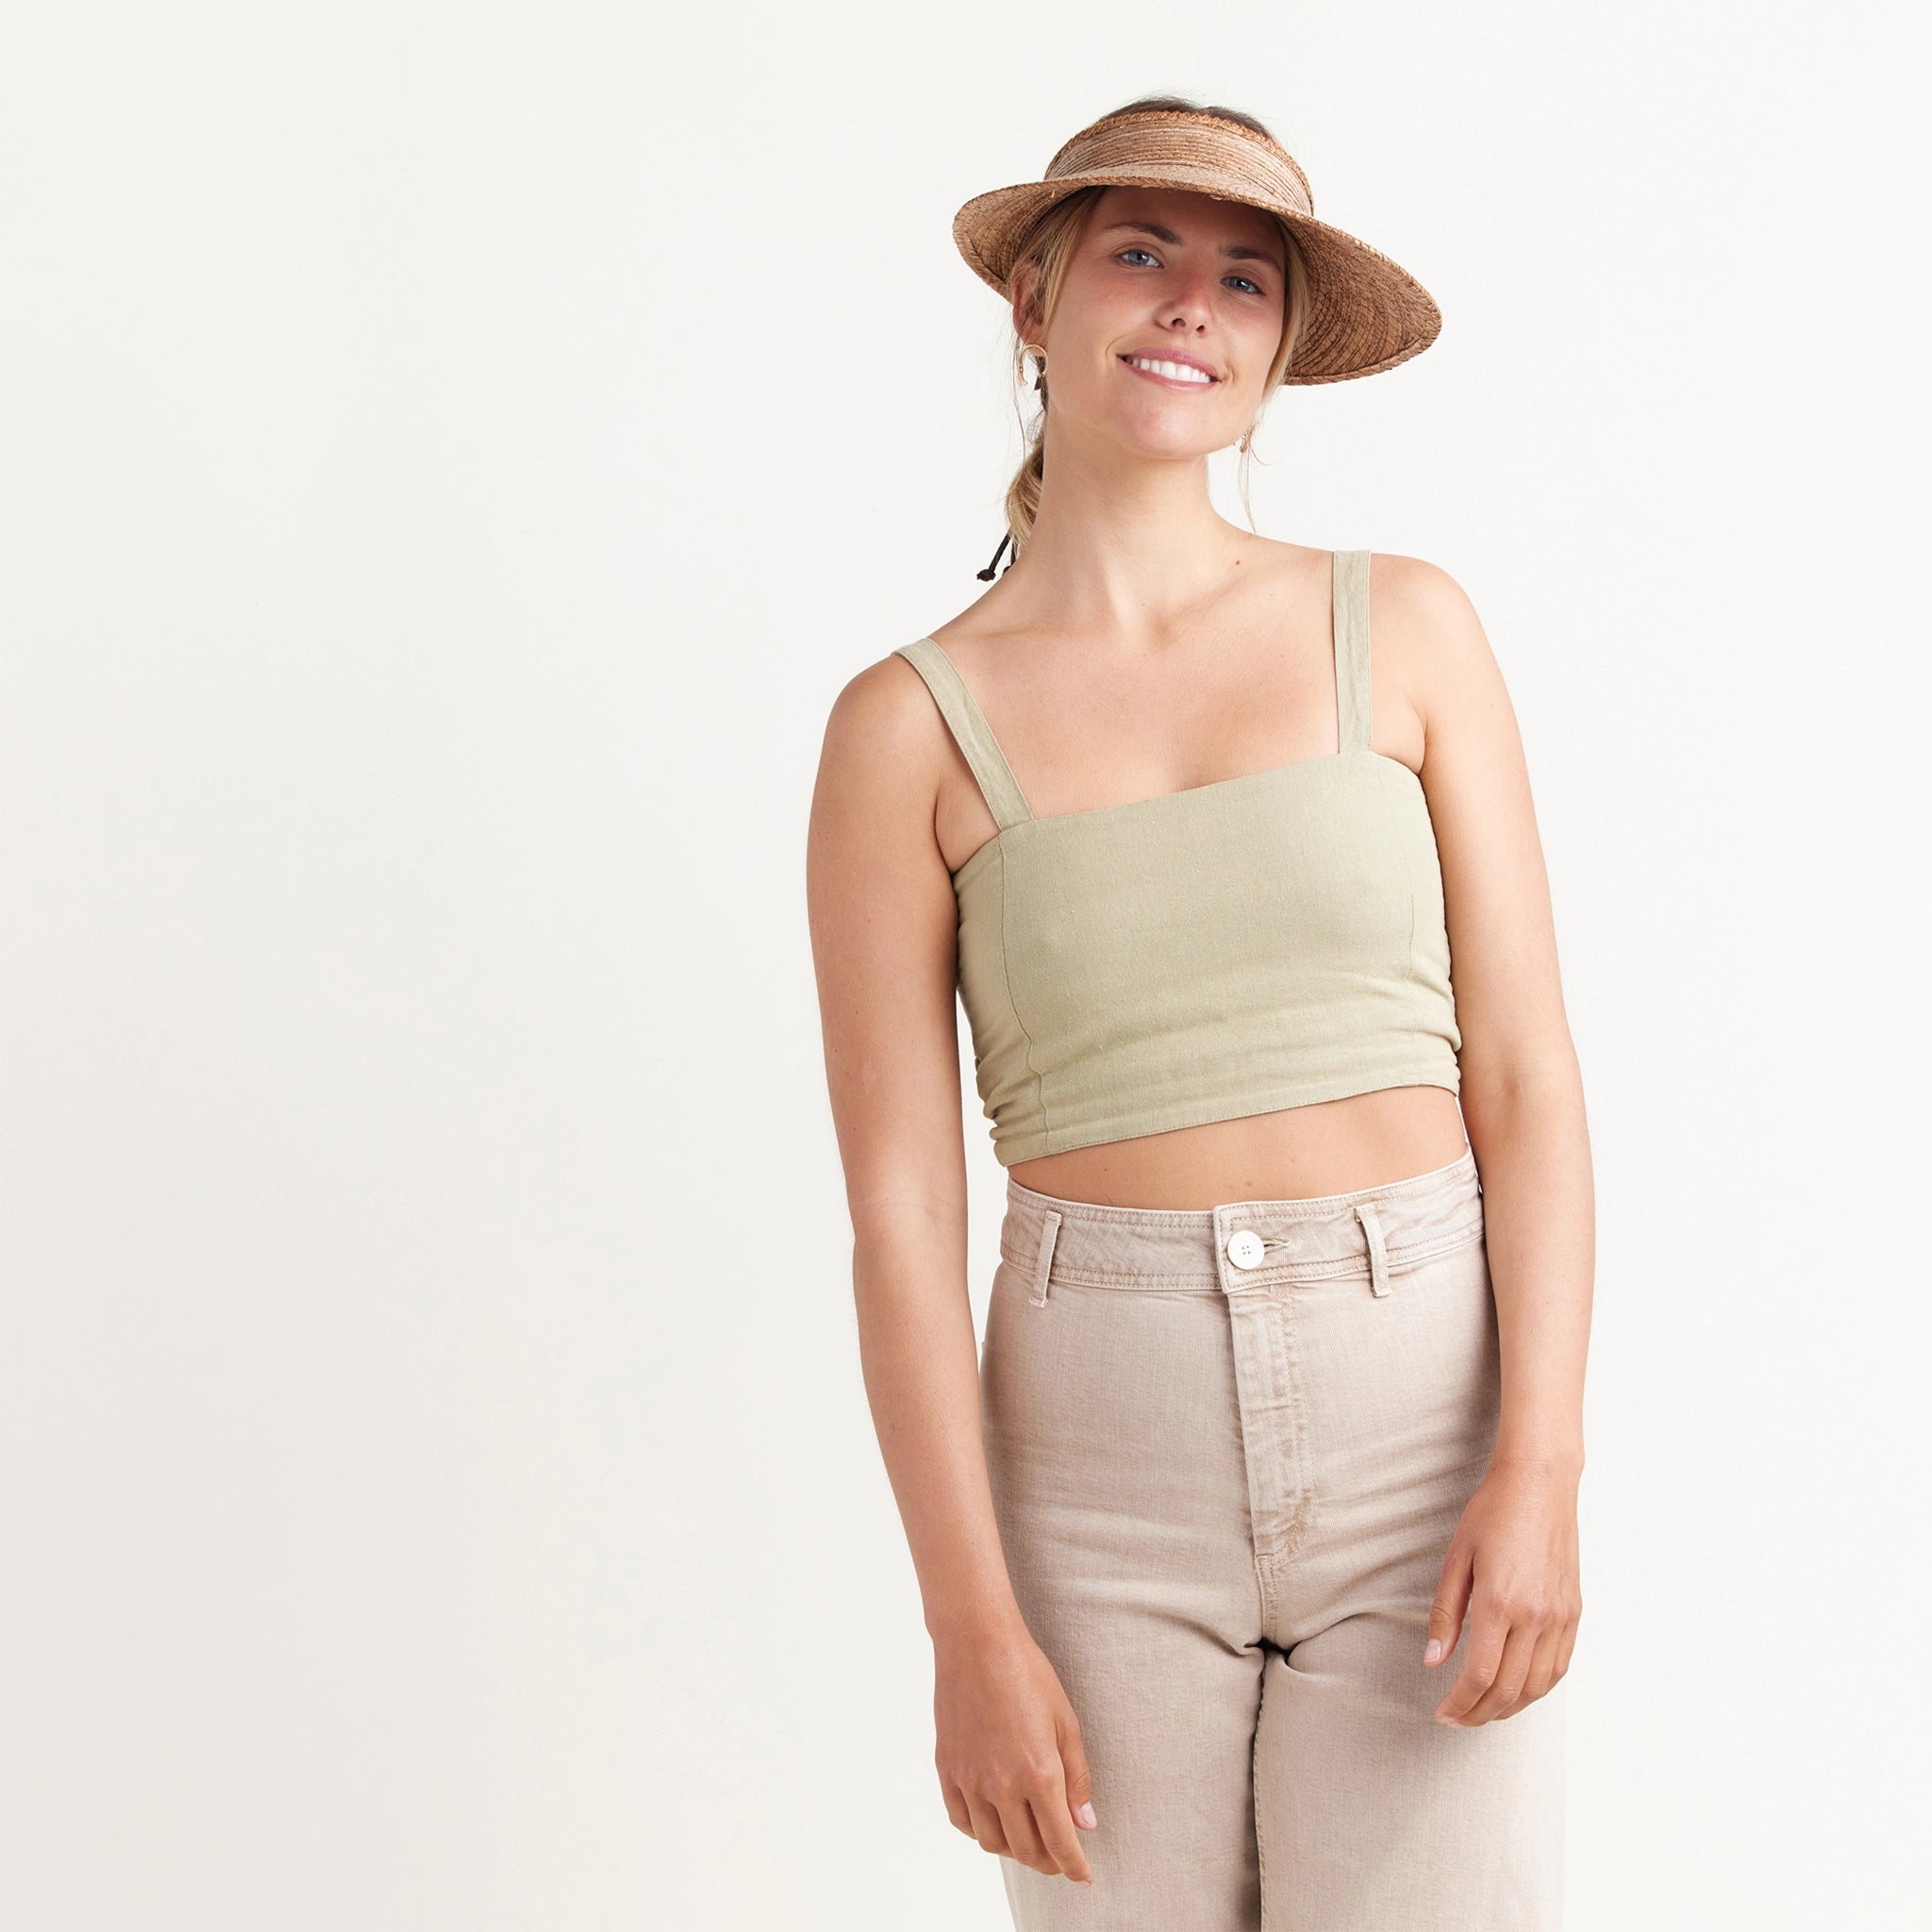 A woven straw visor hat with a large brim and beaded slip knot tie on the back that is adjustable, worn here on a model wearing a tank top and tan pants in front of a white background.